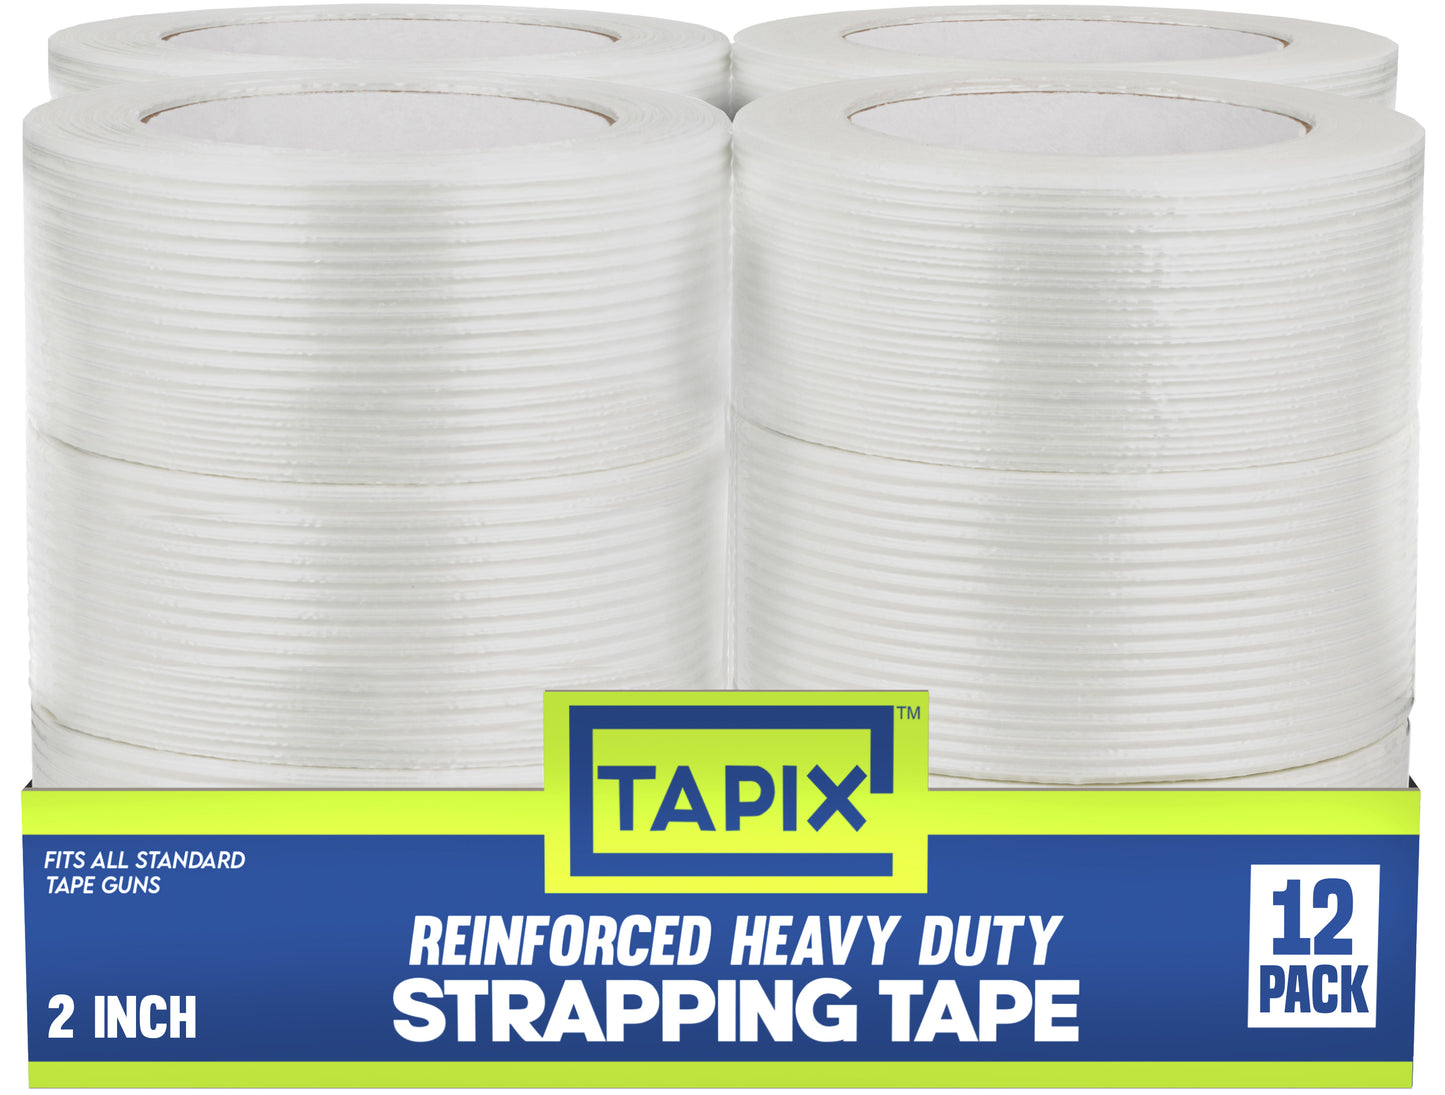 Strapping Tape 2 inch x 60 yds (12 Pack)